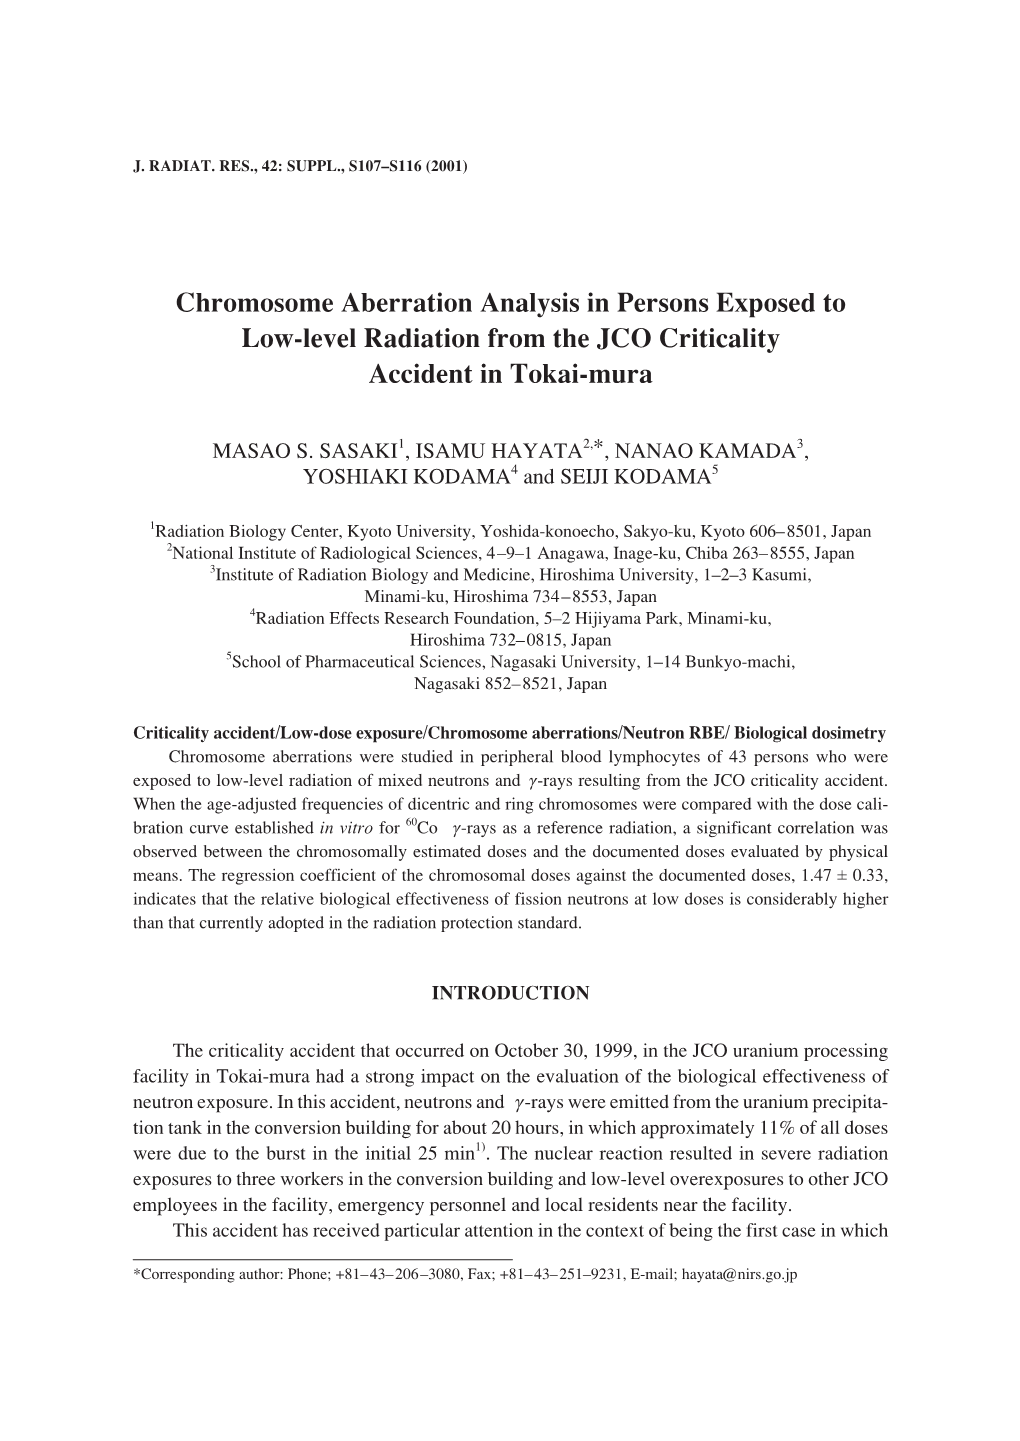 Chromosome Aberration Analysis in Persons Exposed to Low-Level Radiation from the JCO Criticality Accident in Tokai-Mura